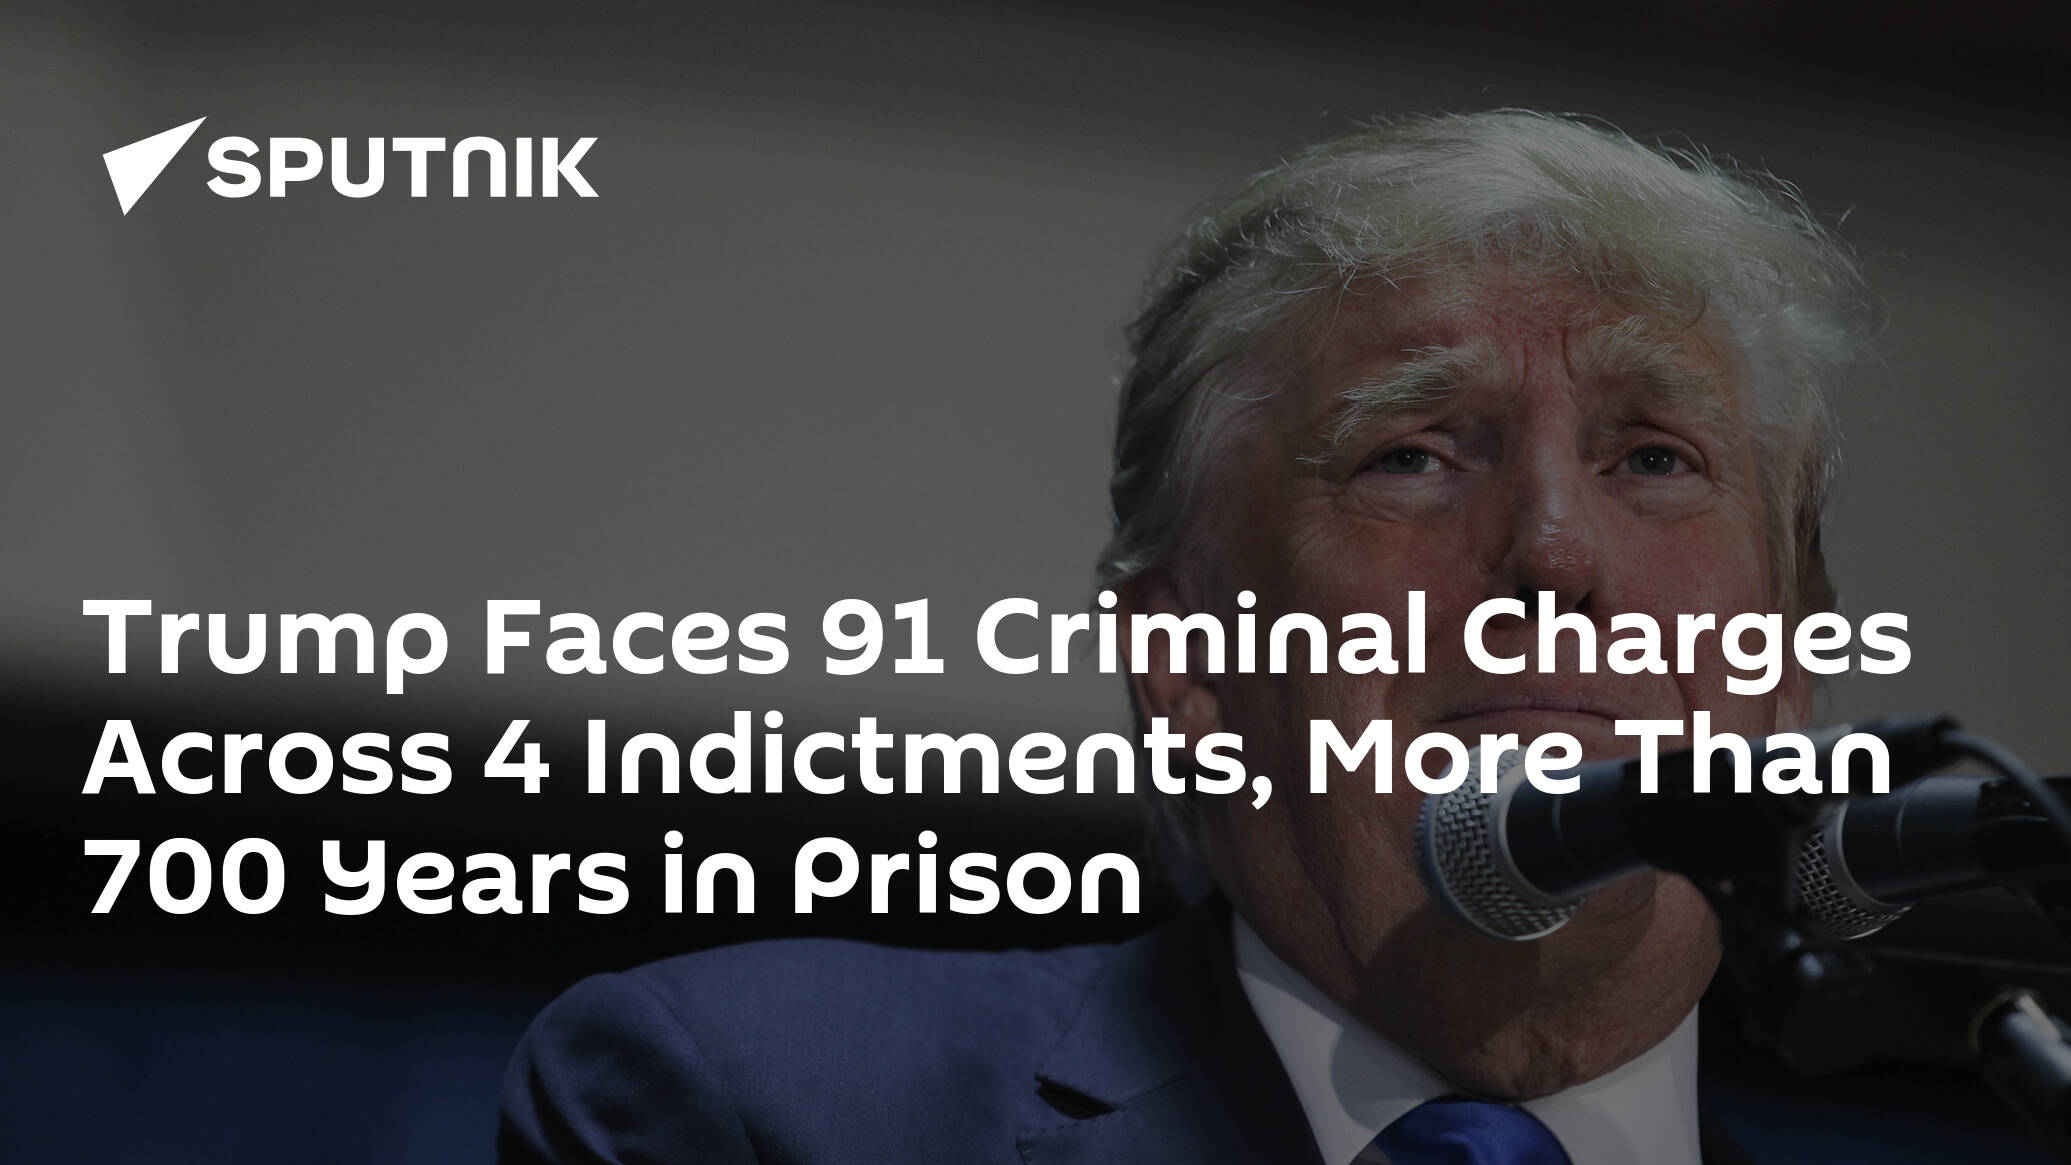 Trump Faces 91 Criminal Charges Across 4 Indictments, More Than 700 Years in Prison